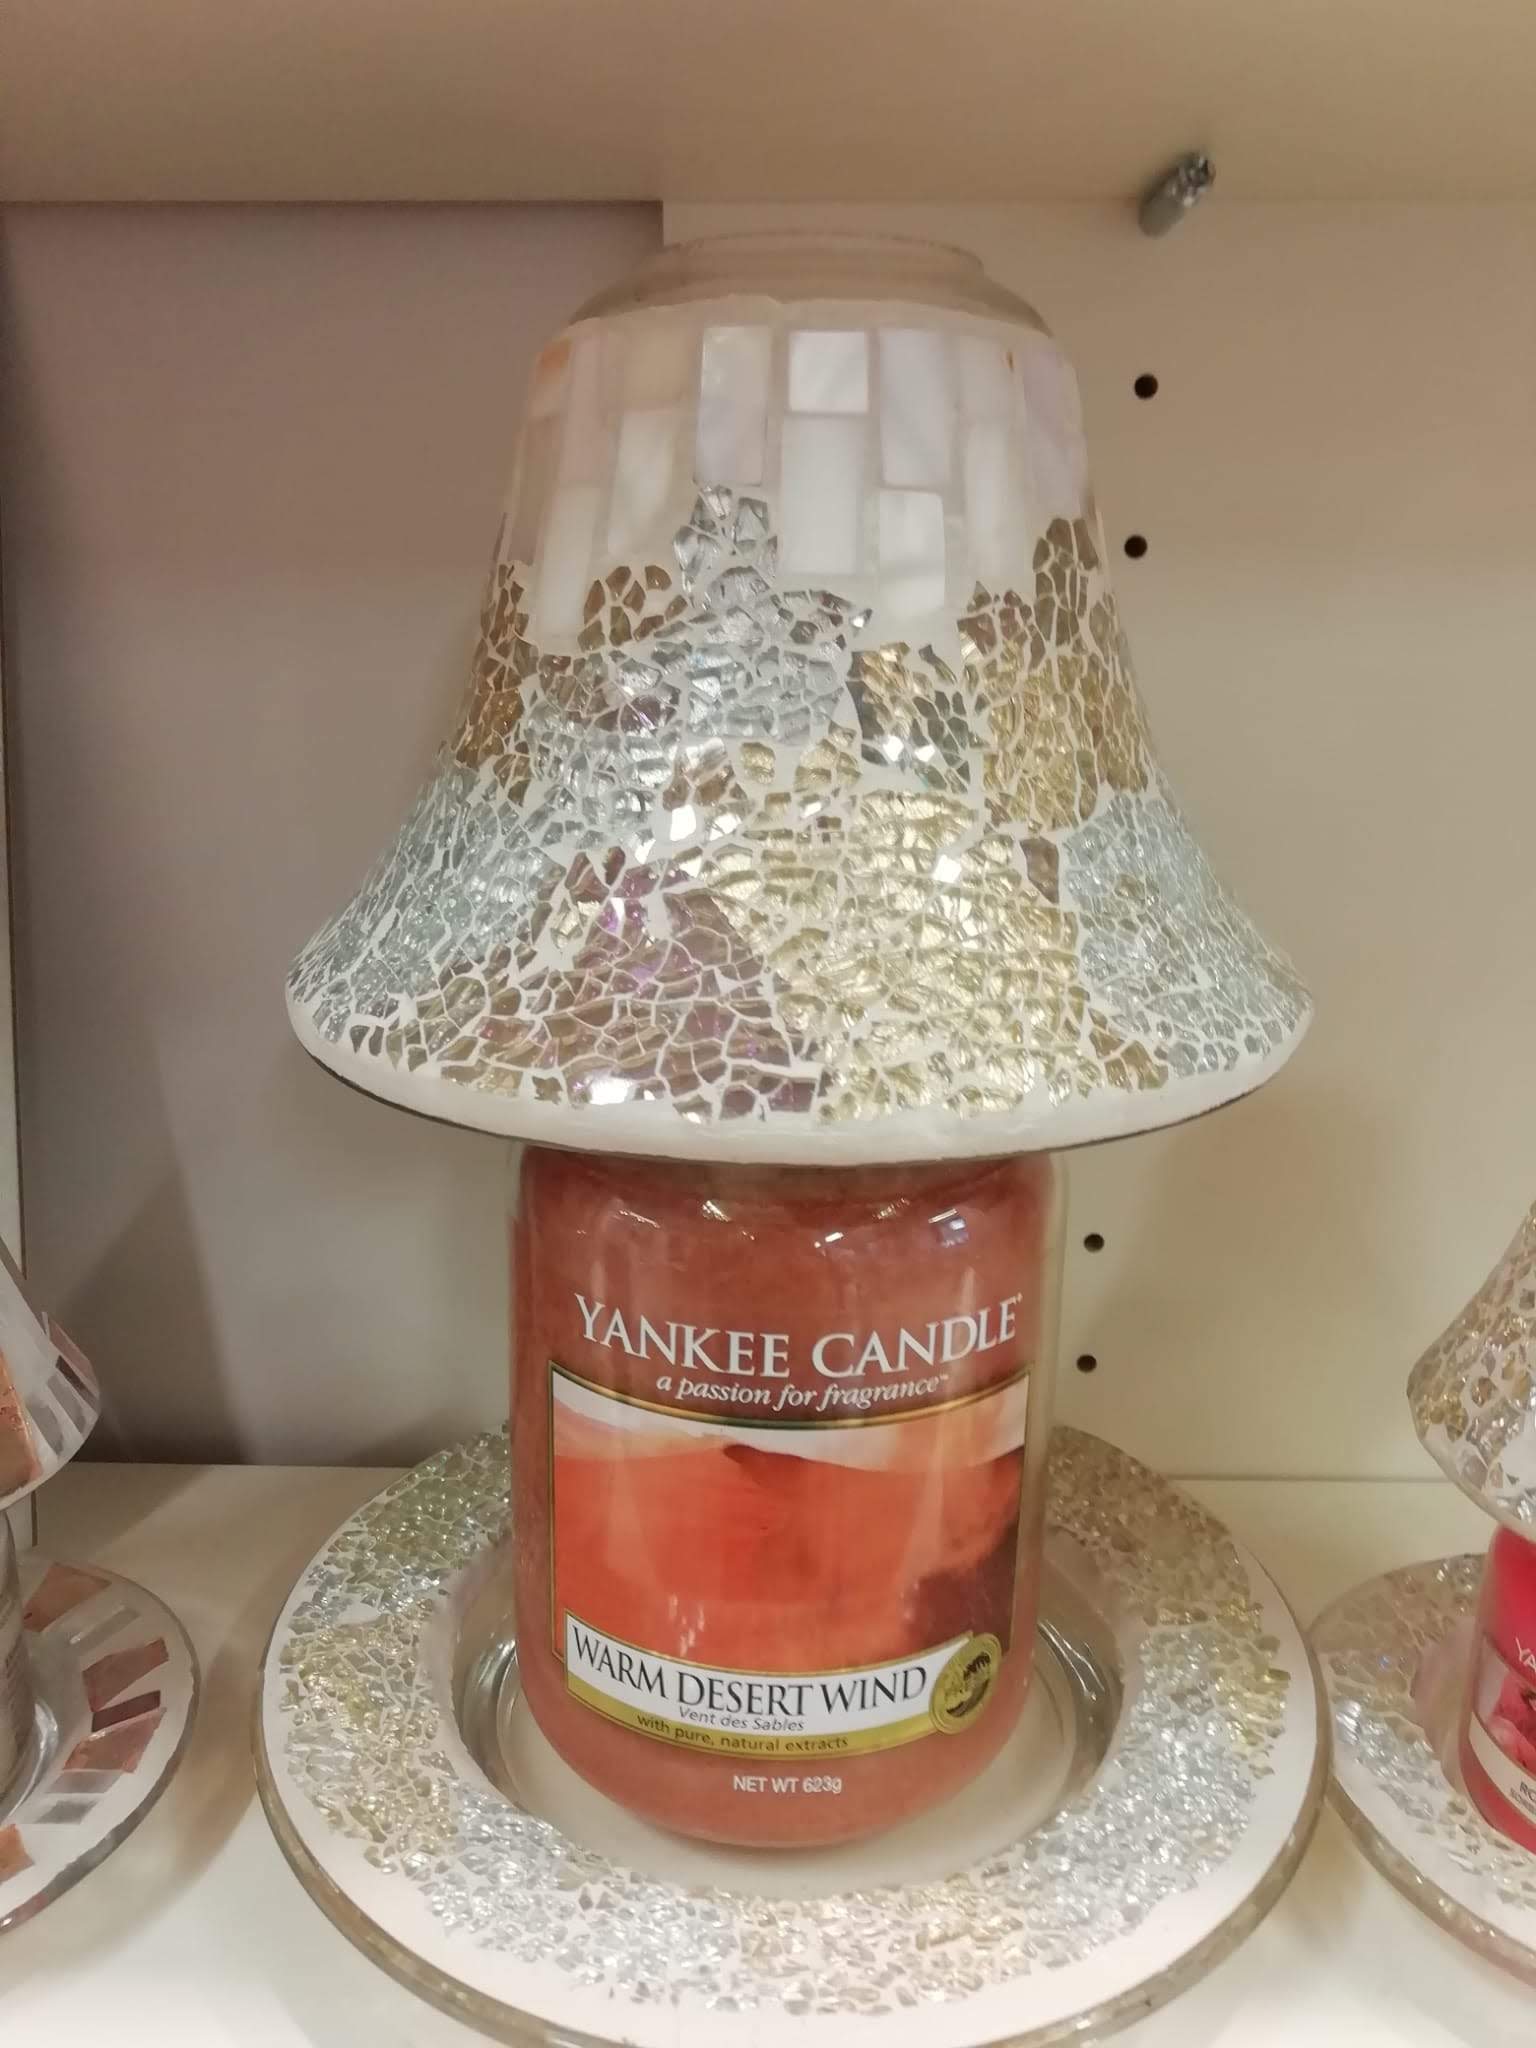 YANKEE CANDLE GOLD and Pearl Crackle bruciatore per tart EUR 17,95